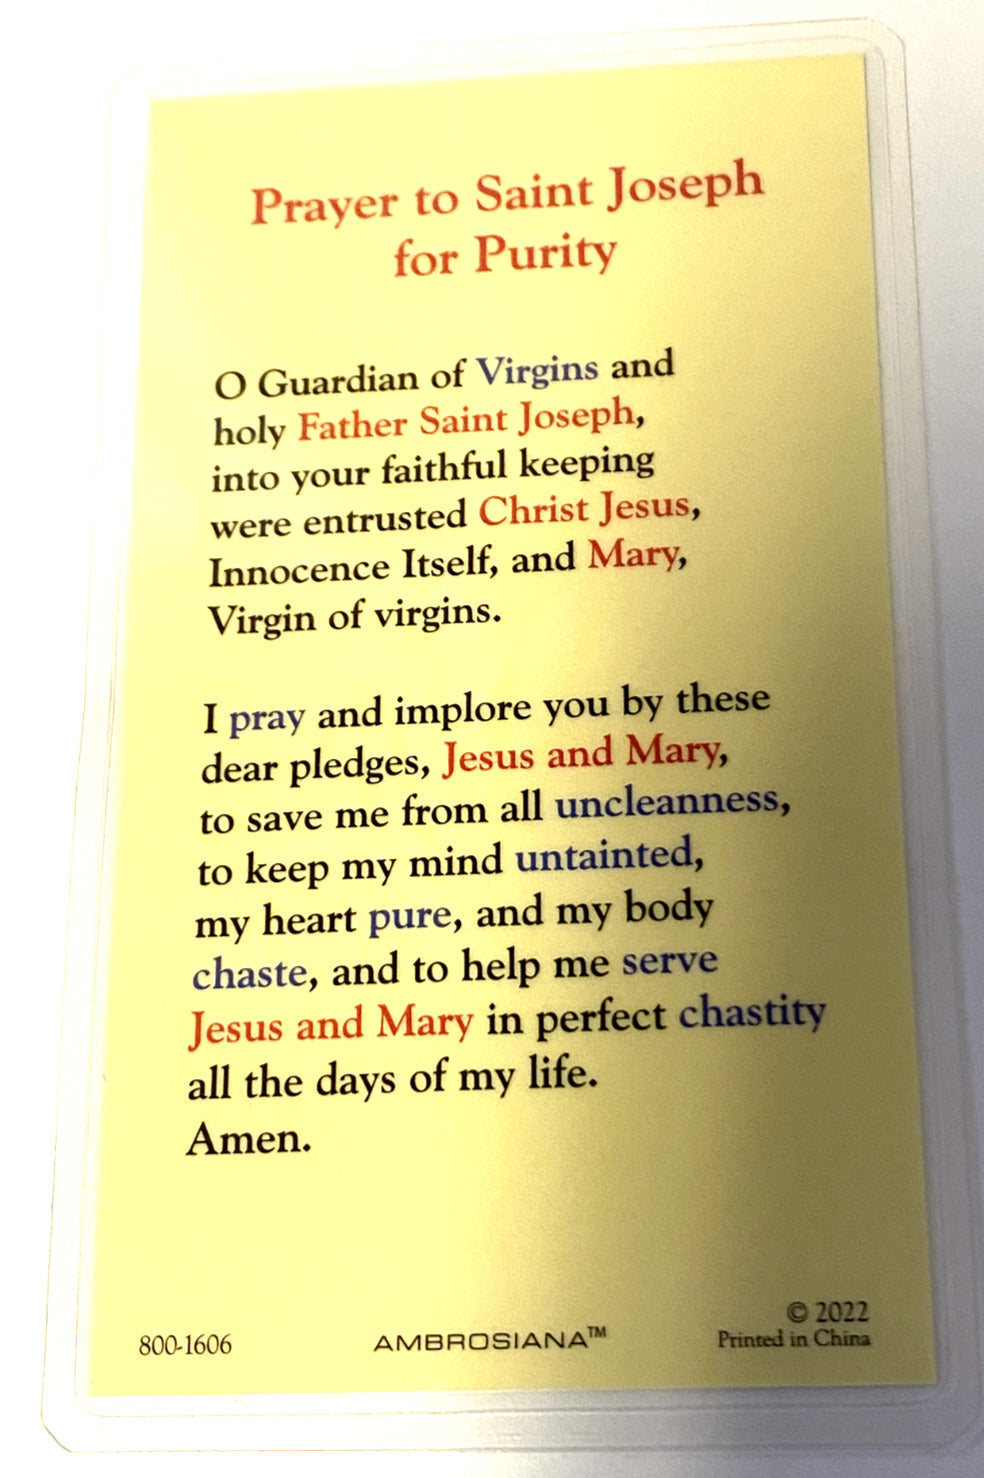 Saint Joseph Laminated "Prayer for Purity" Card, New - Bob and Penny Lord